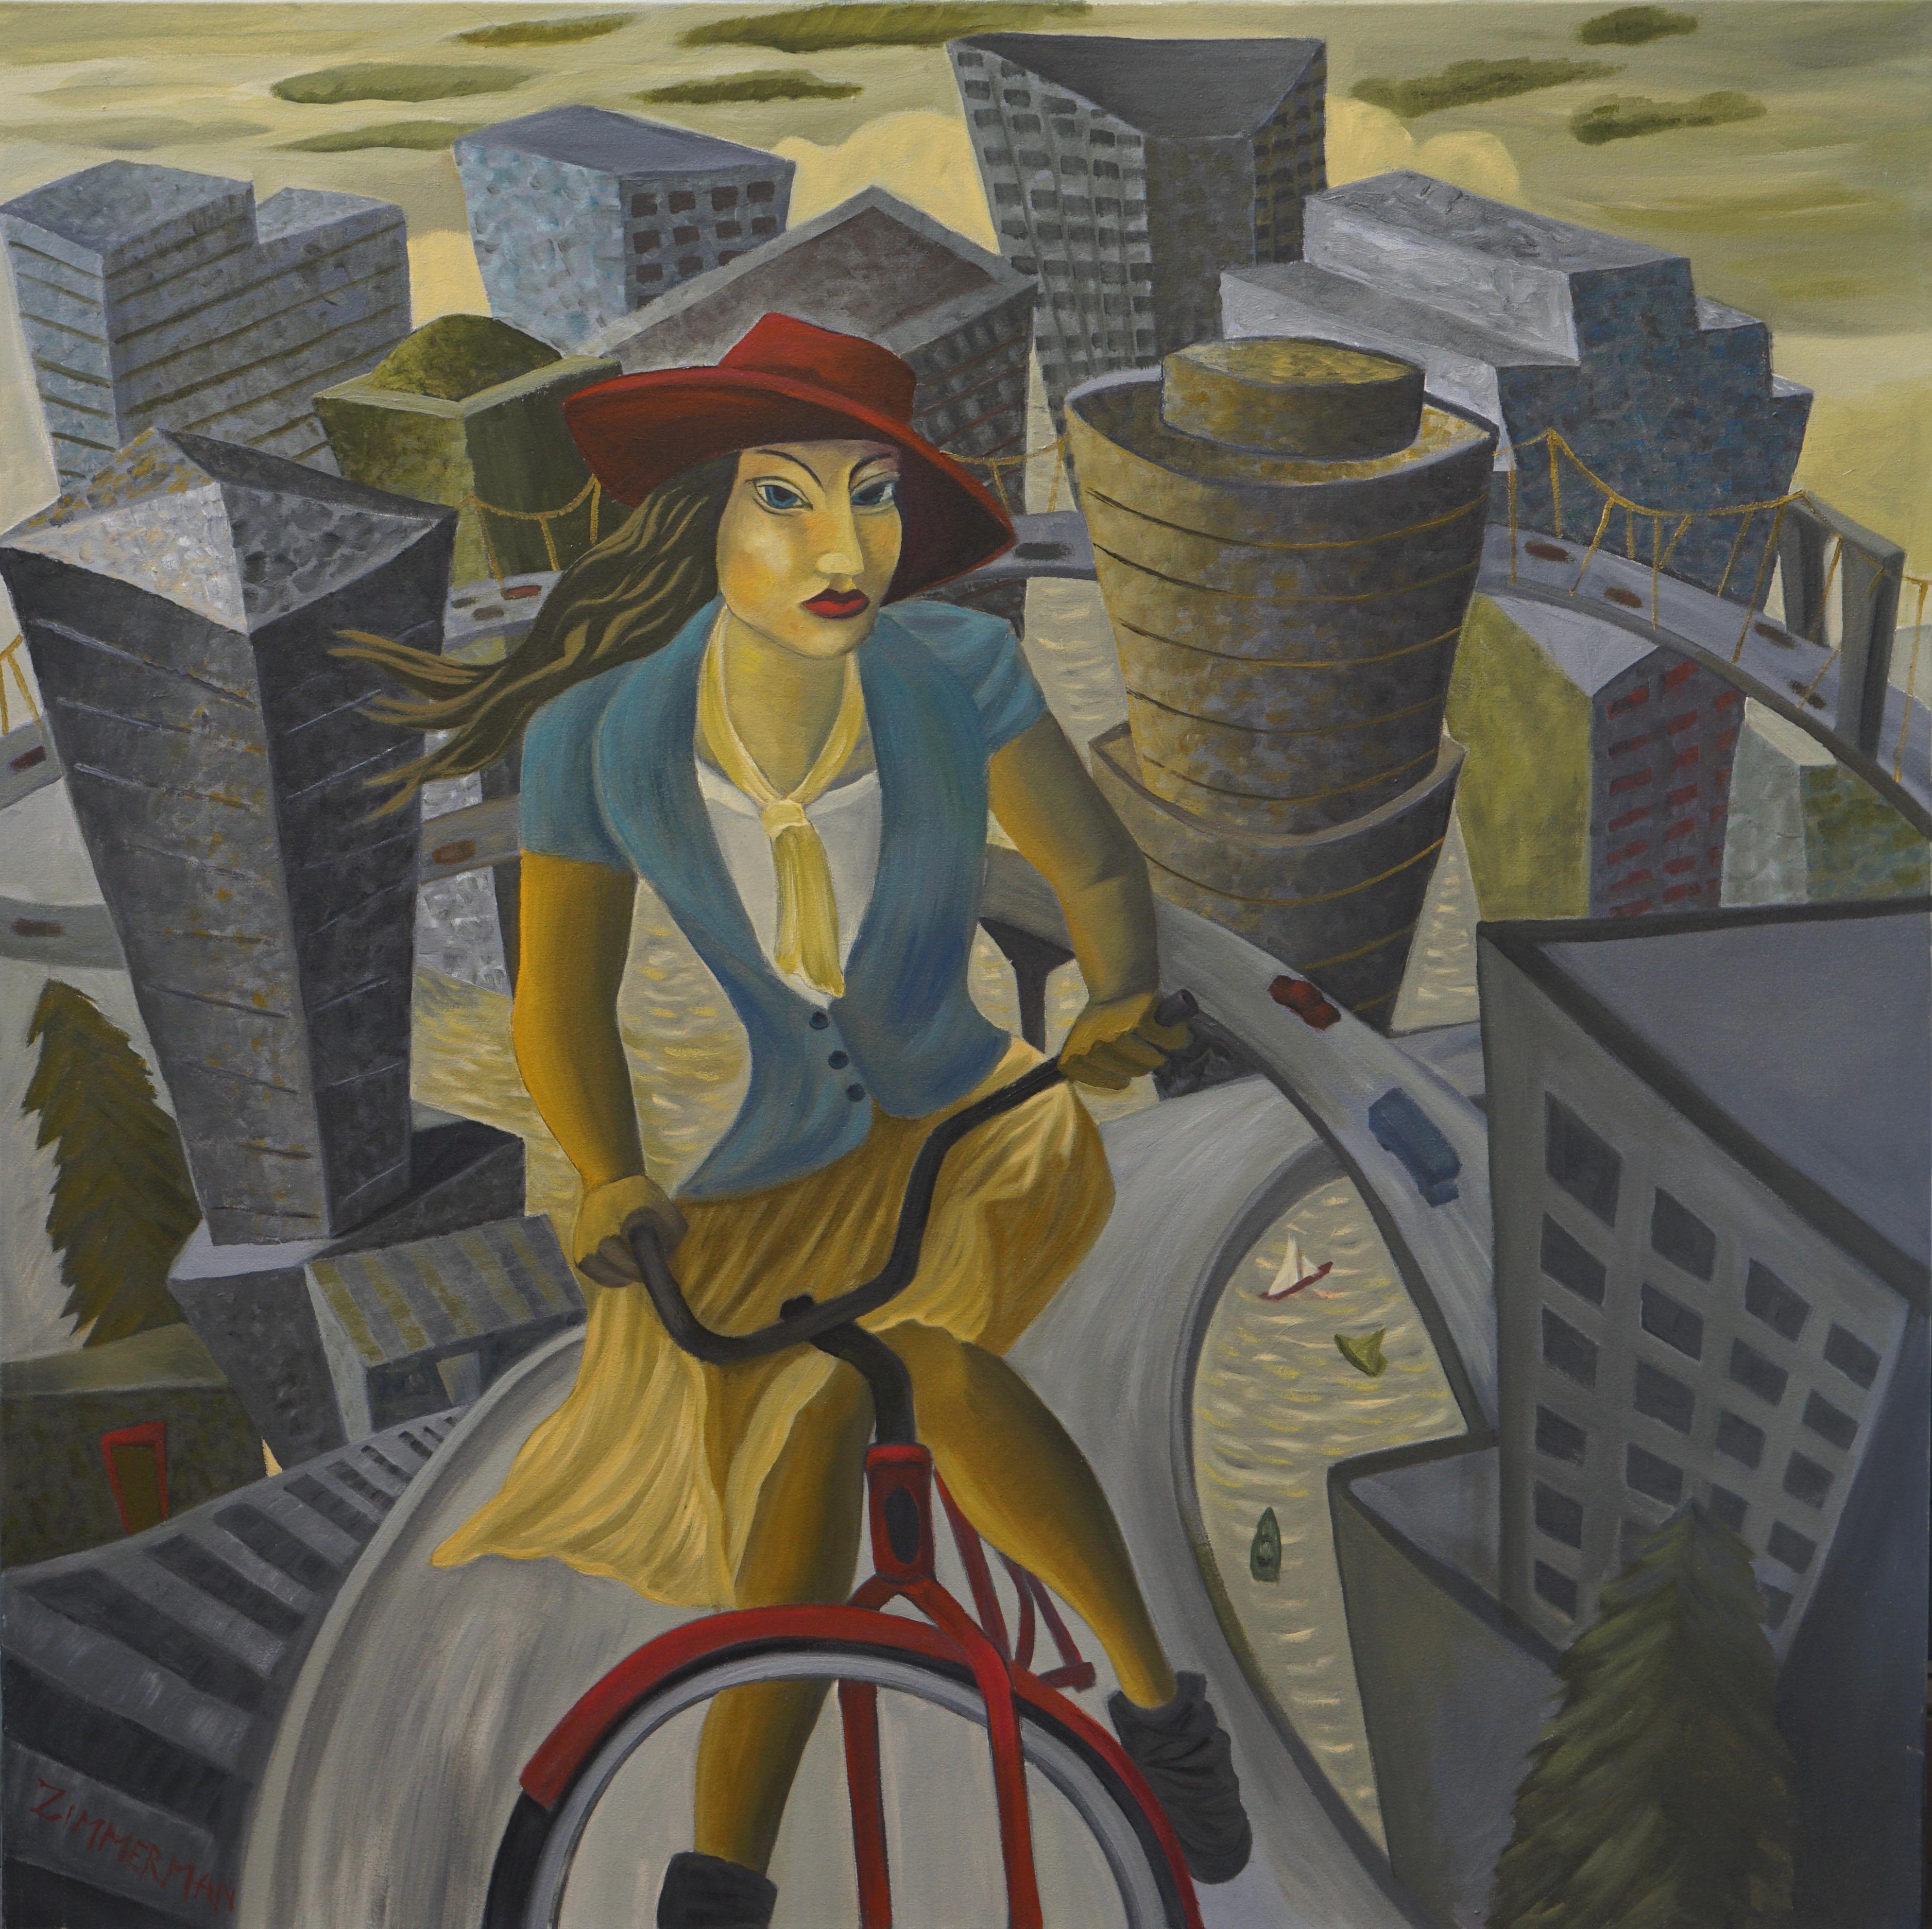 A cubistic, playful cityscape of Portland, with its famous bridges crossing the river is a backdrop for this female biker, clad in vintage wear and a red hat. 

Portland's Finest: Viva la Fem -  Figurative Painting By Marc Zimmerman

Keywords: 